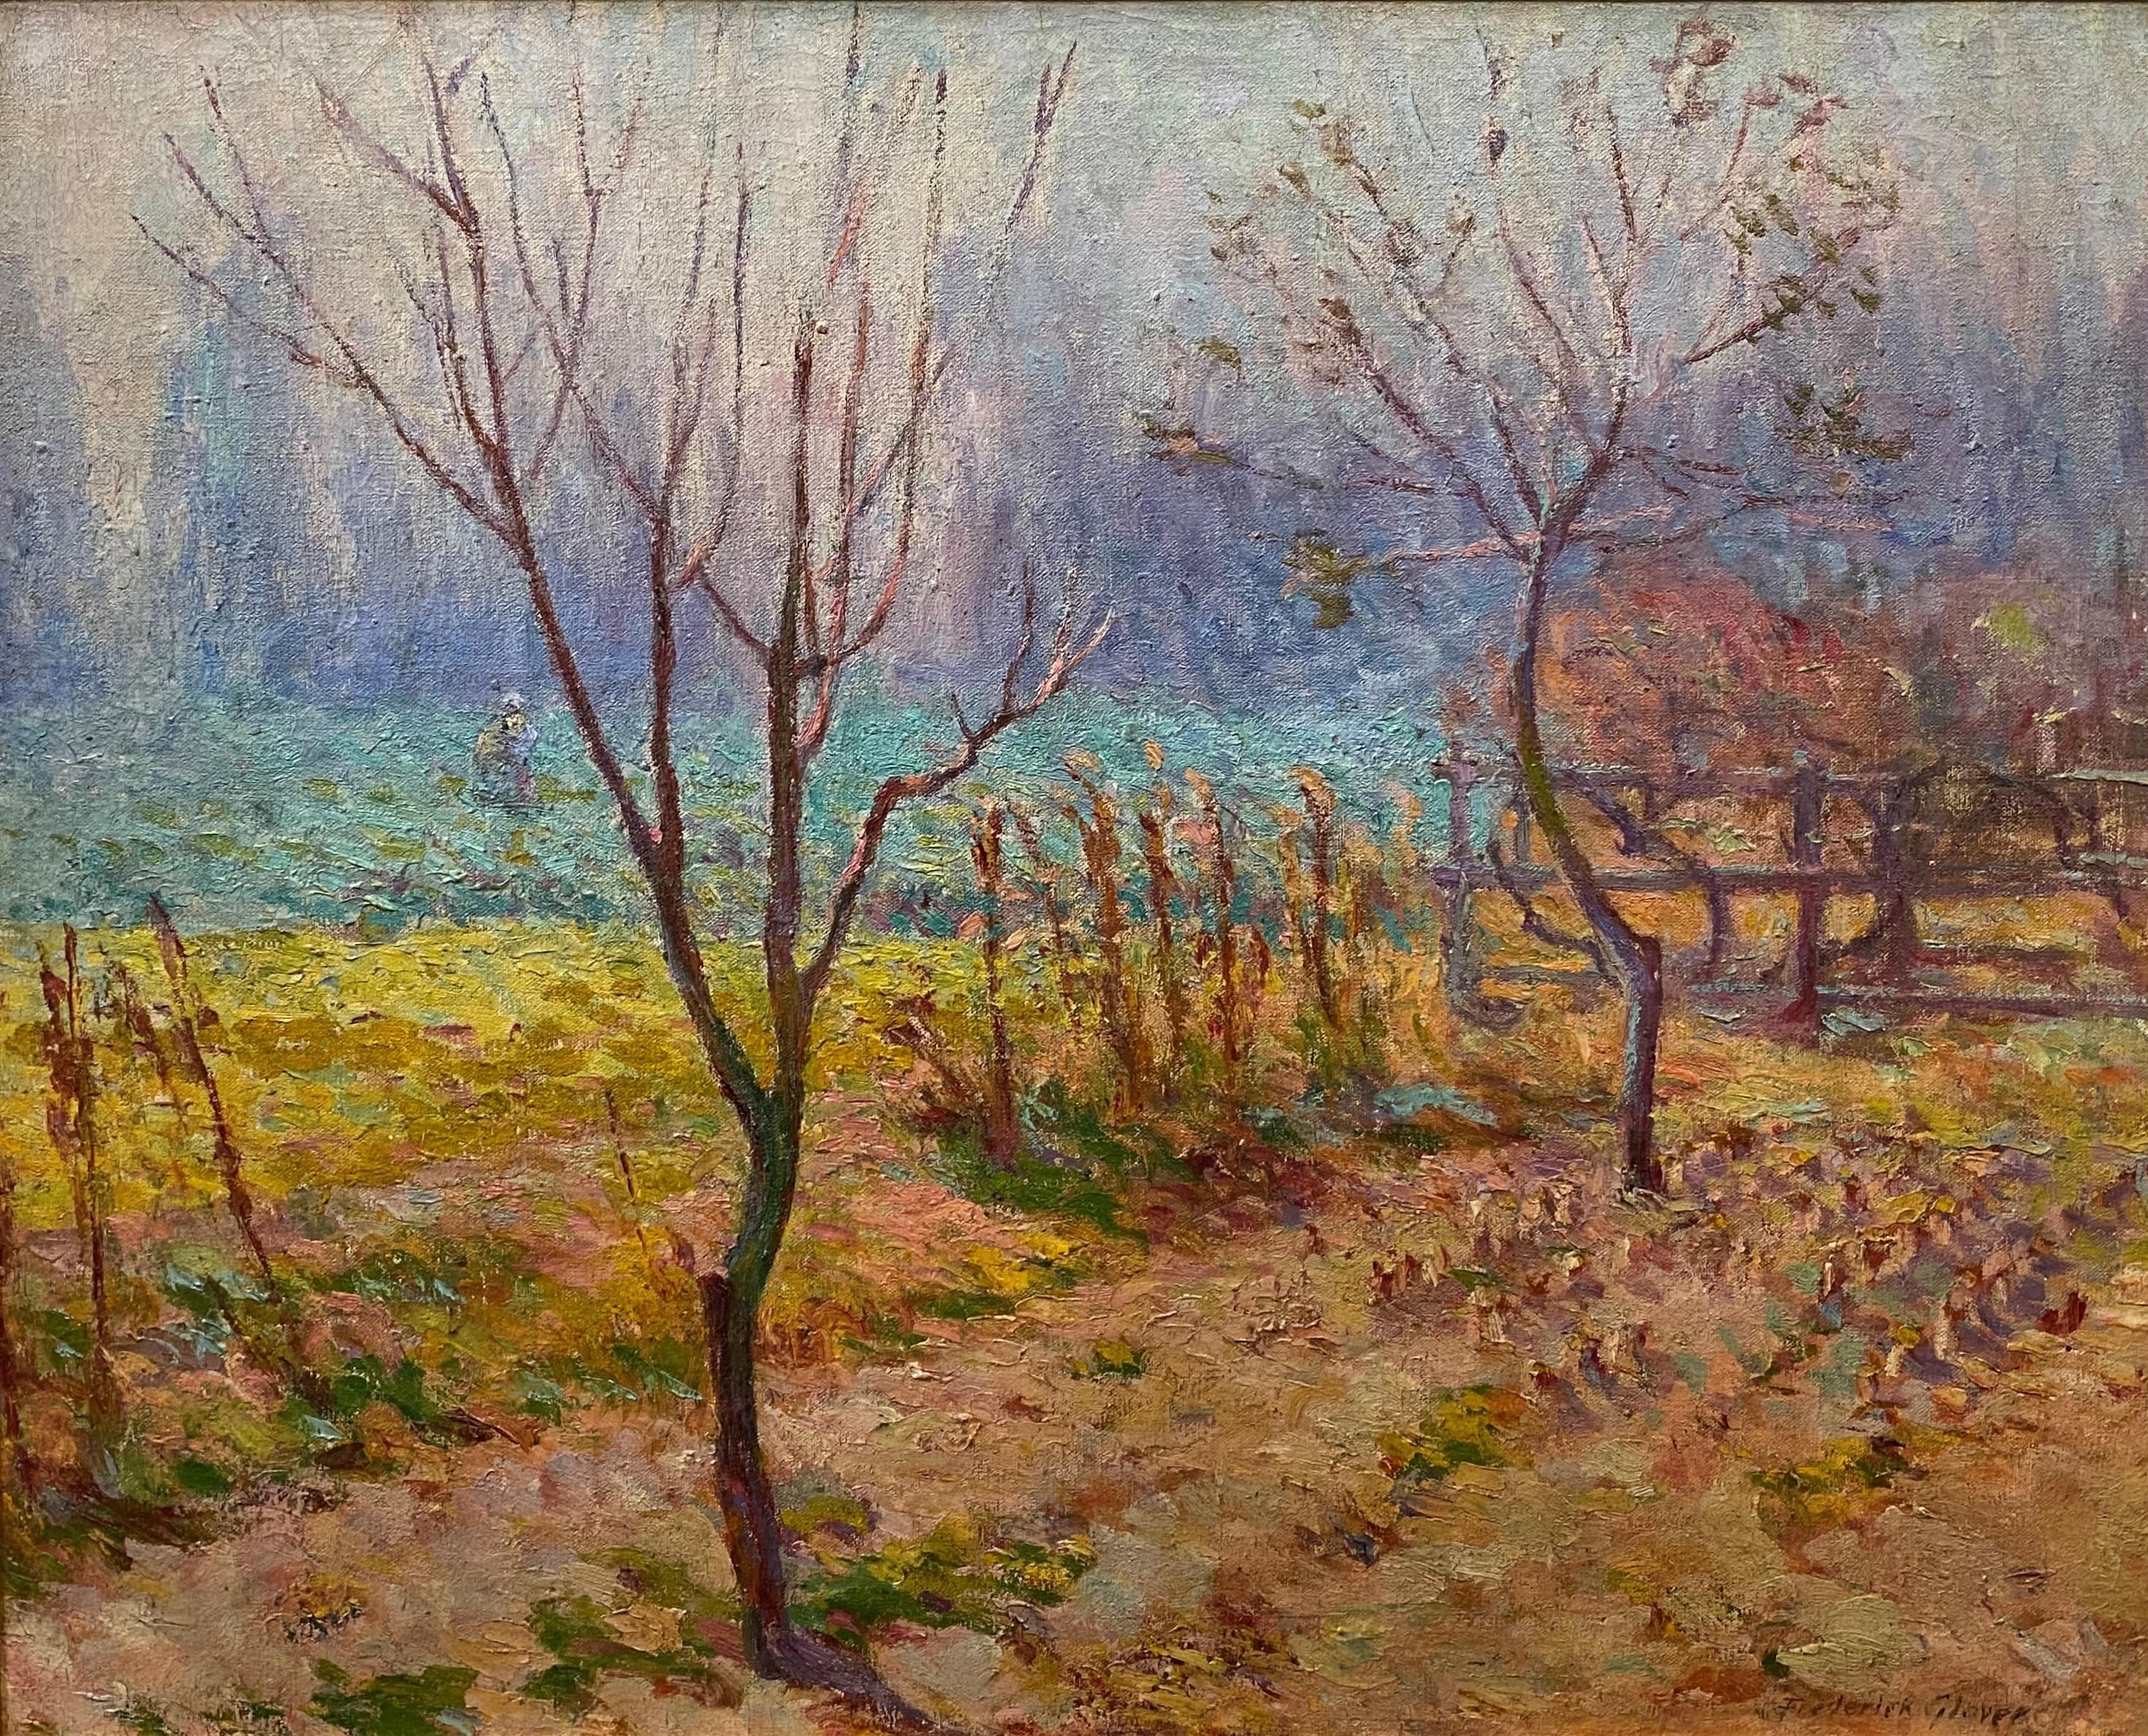 Impressionist Landscape with Trees - Painting by Frederick W. Glover